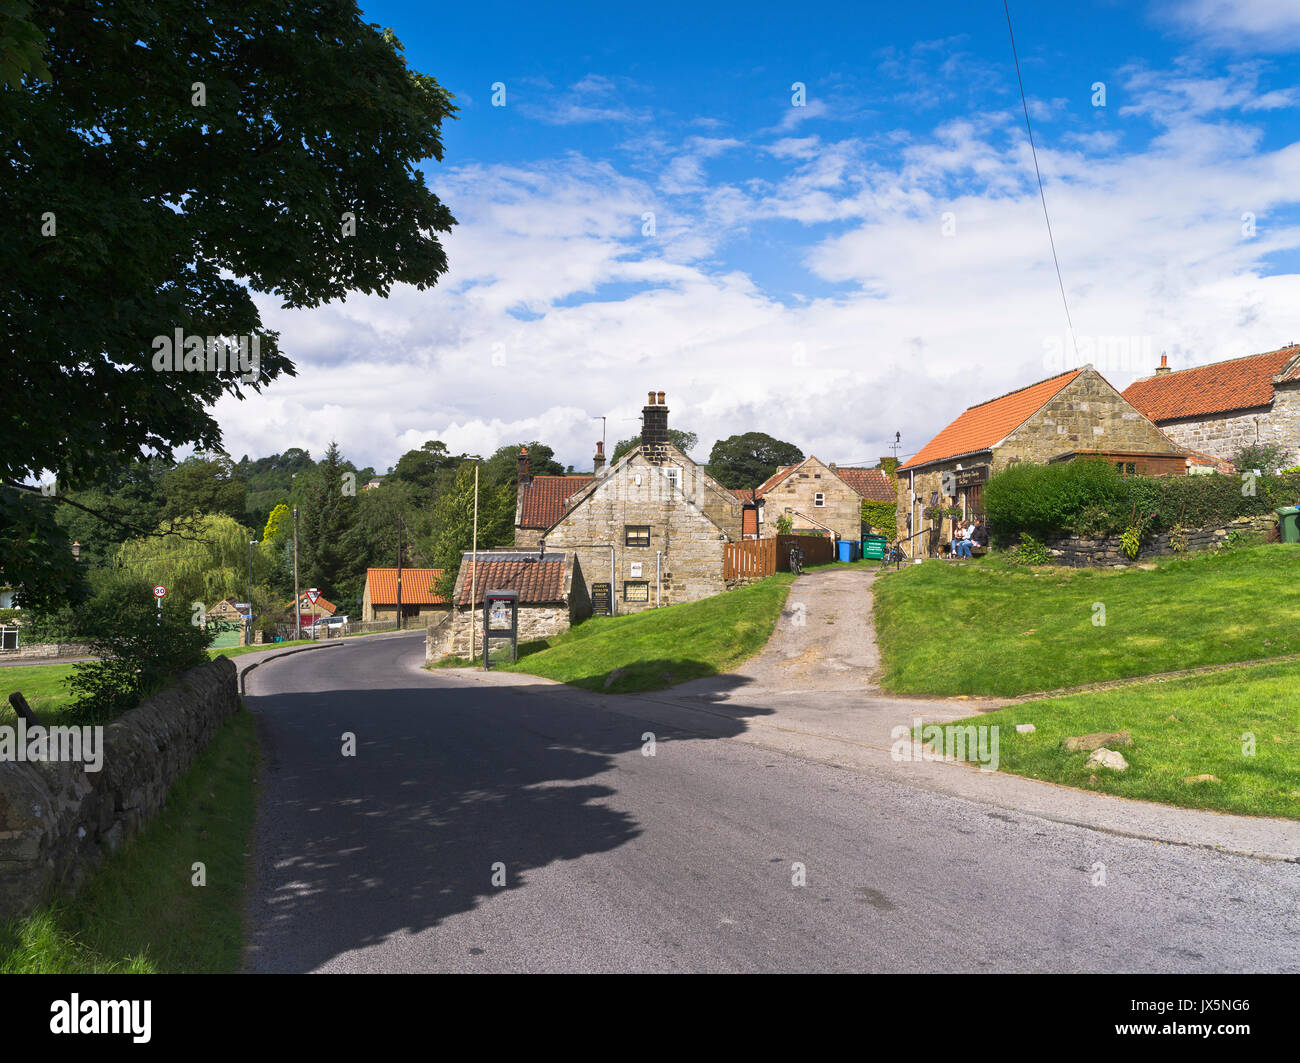 dh North Yorkshire Moors DANBY NORTH YORKSHIRE Tourist relaxing village shop traditional houses people road york moor villages yorks Stock Photo